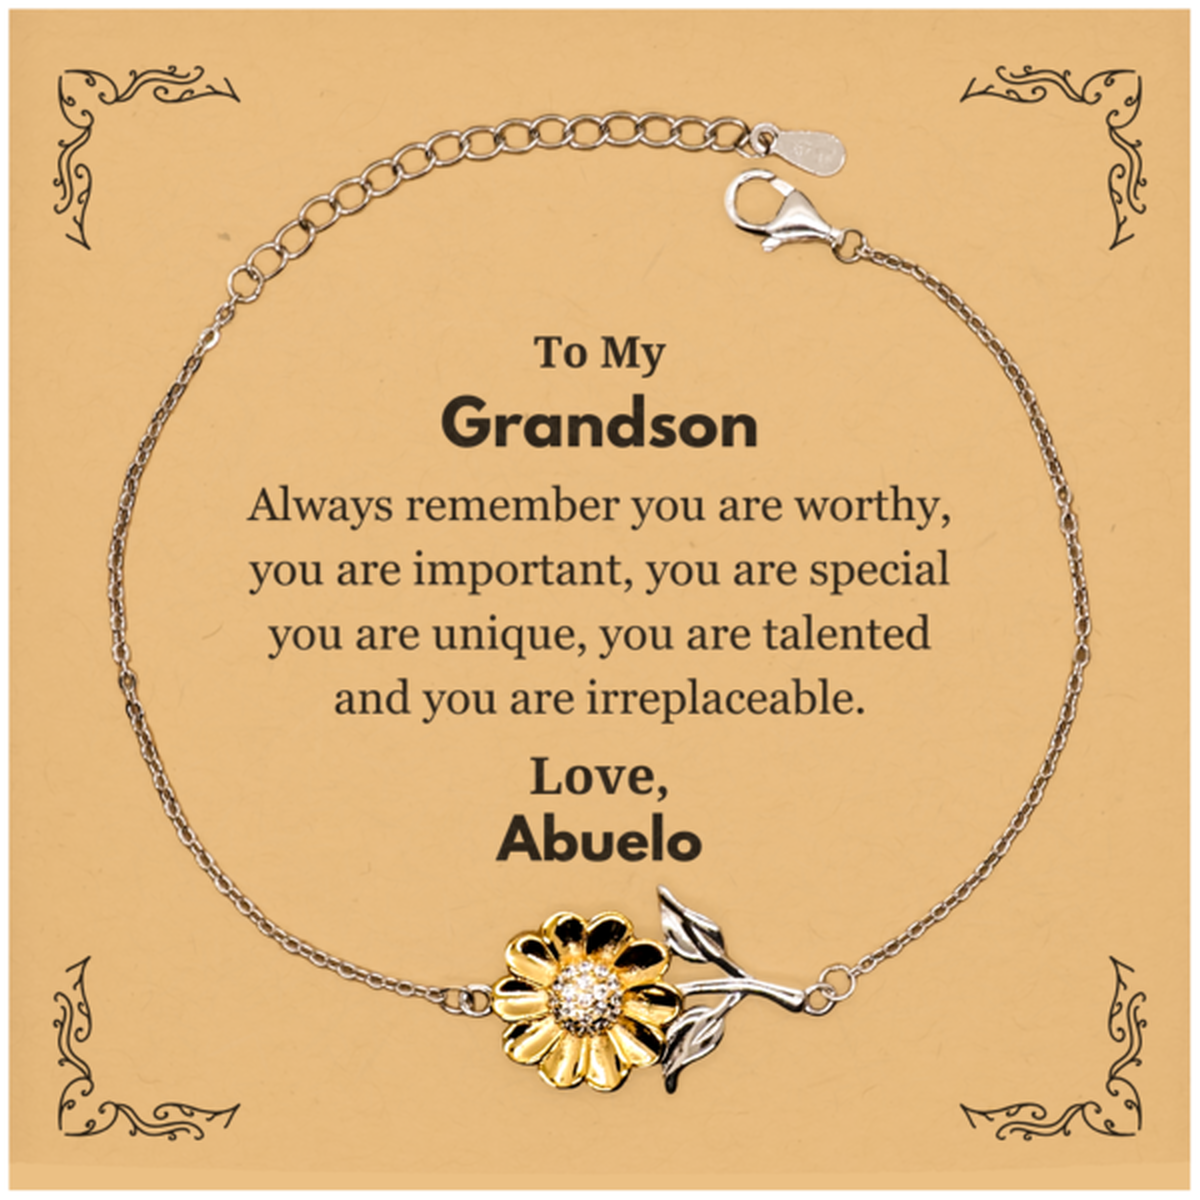 Grandson Birthday Gifts from Abuelo, Inspirational Sunflower Bracelet for Grandson Christmas Graduation Gifts for Grandson Always remember you are worthy, you are important. Love, Abuelo